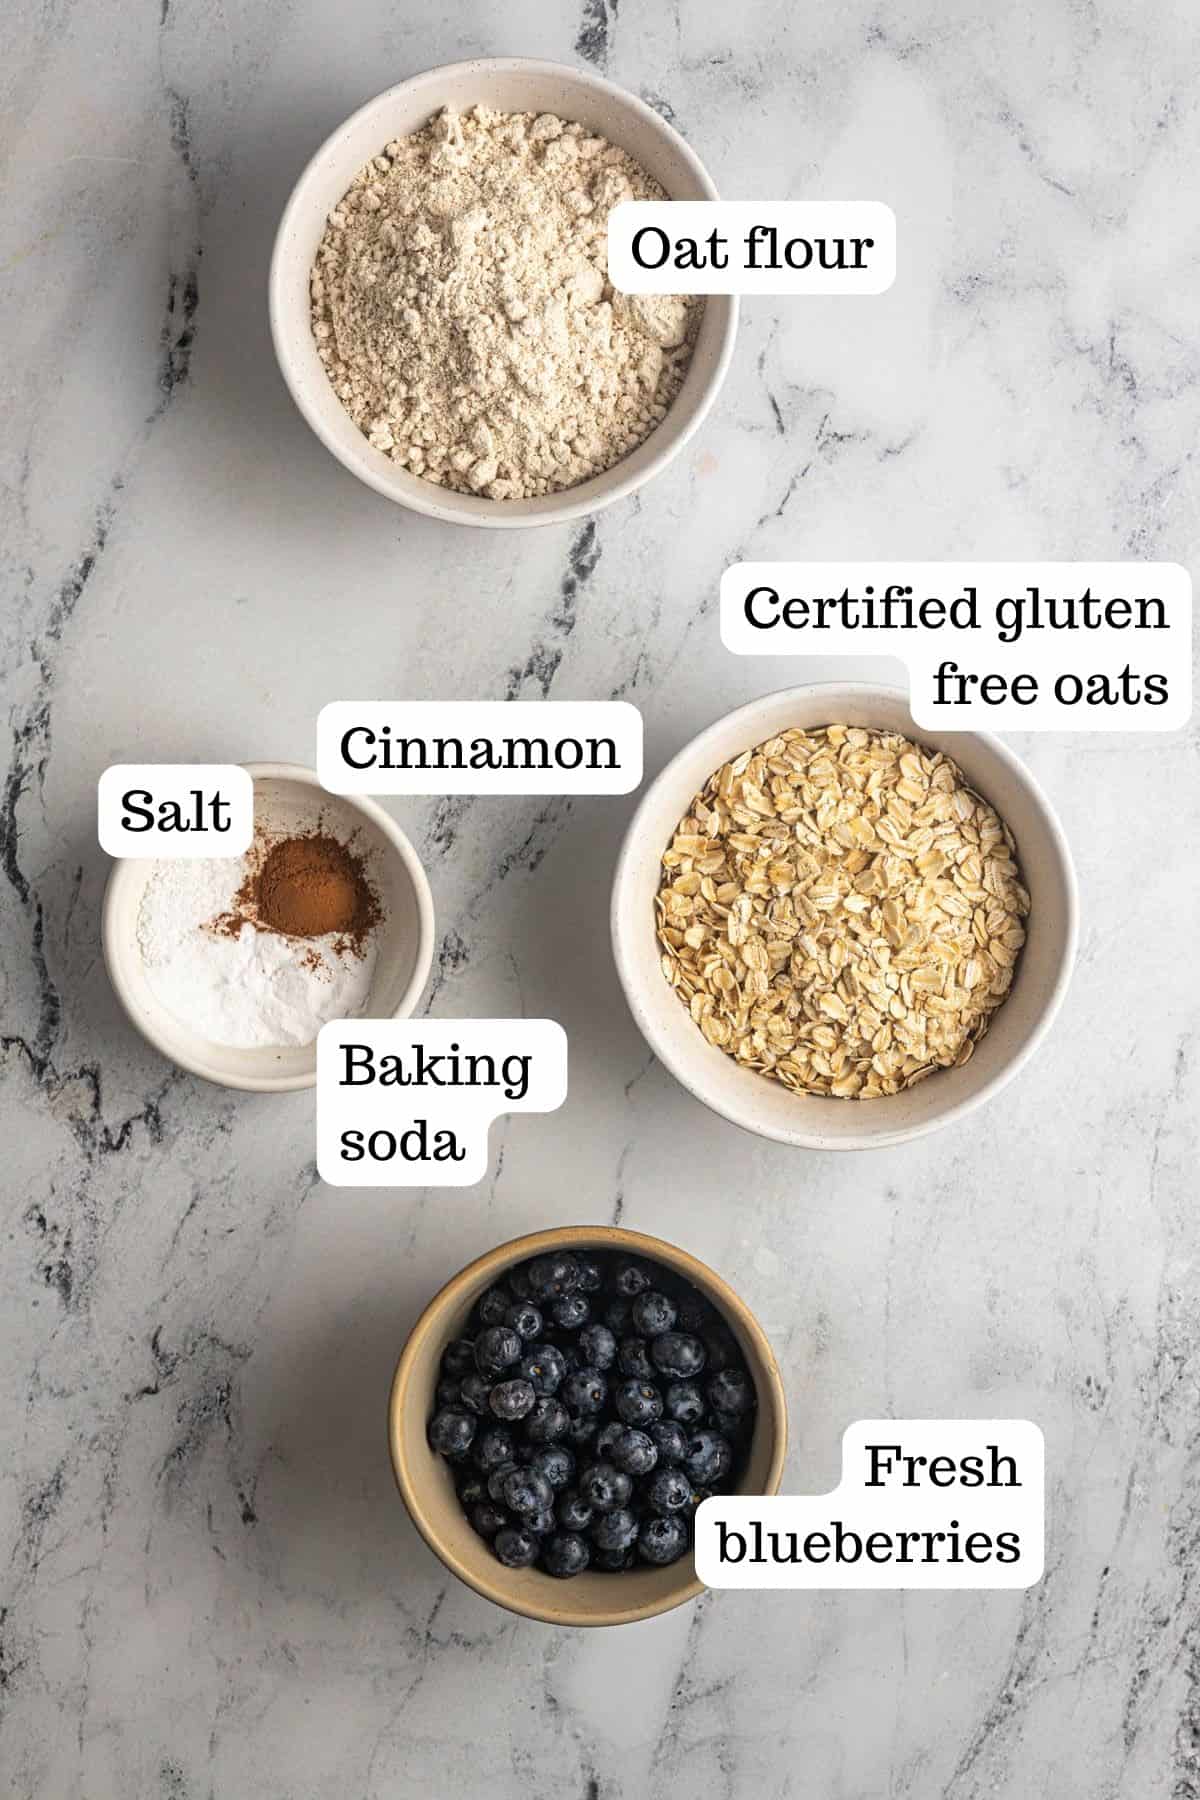 Image shows the dry ingredients for the Blueberry Banana Oat Muffins. In the bowls there is oat flour, certified gluten-free oats, cinnamon, salt, baking soda, and a bowl of fresh blueberries.